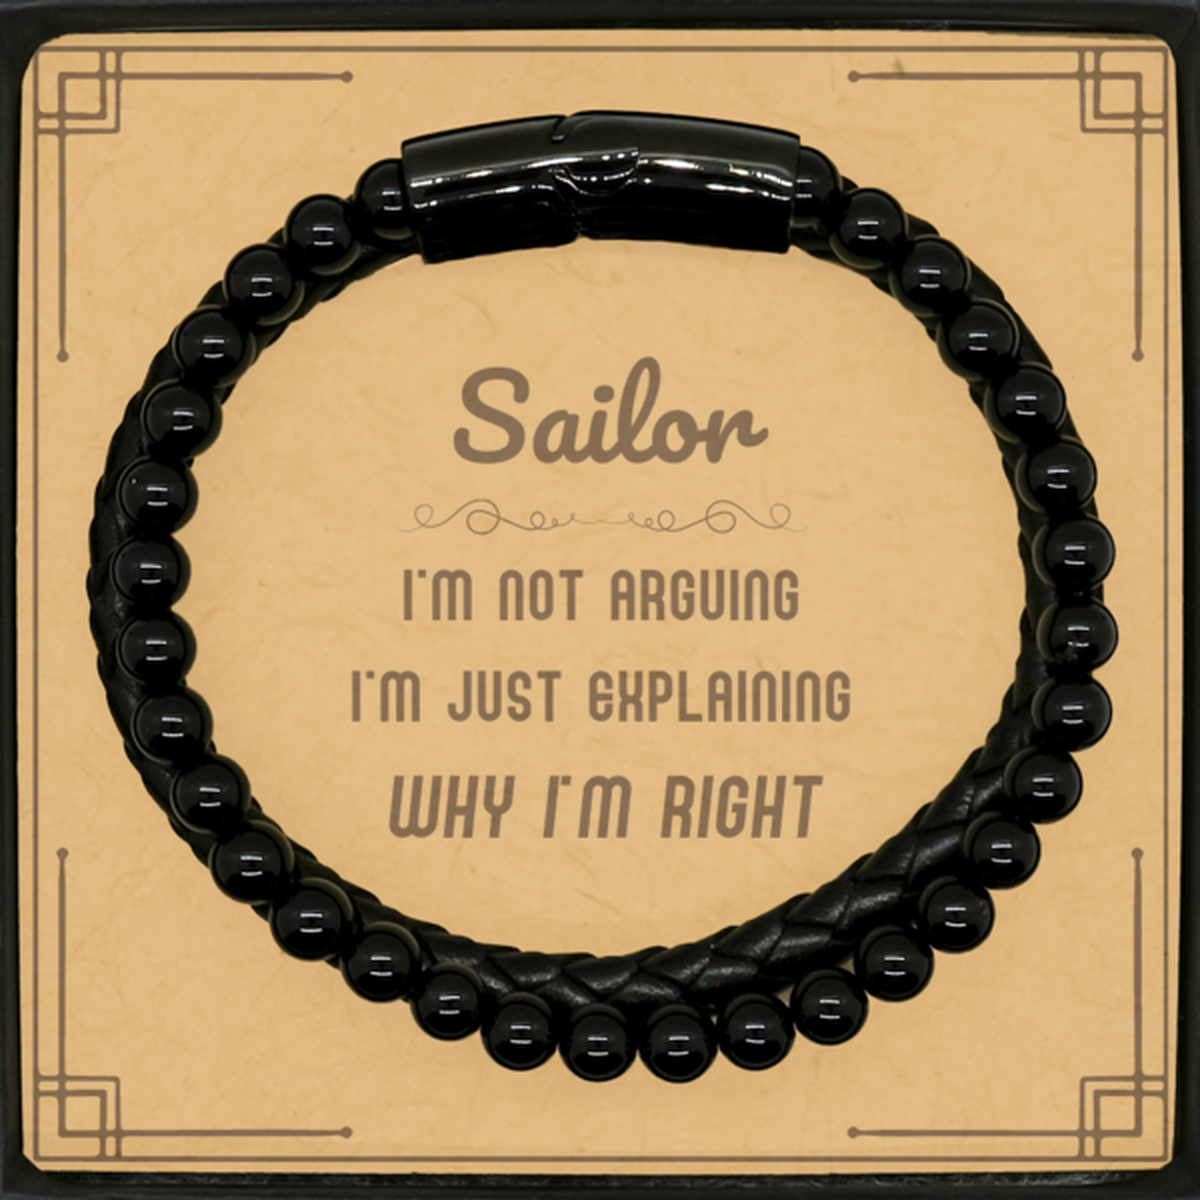 Sailor I'm not Arguing. I'm Just Explaining Why I'm RIGHT Stone Leather Bracelets, Funny Saying Quote Sailor Gifts For Sailor Message Card Graduation Birthday Christmas Gifts for Men Women Coworker